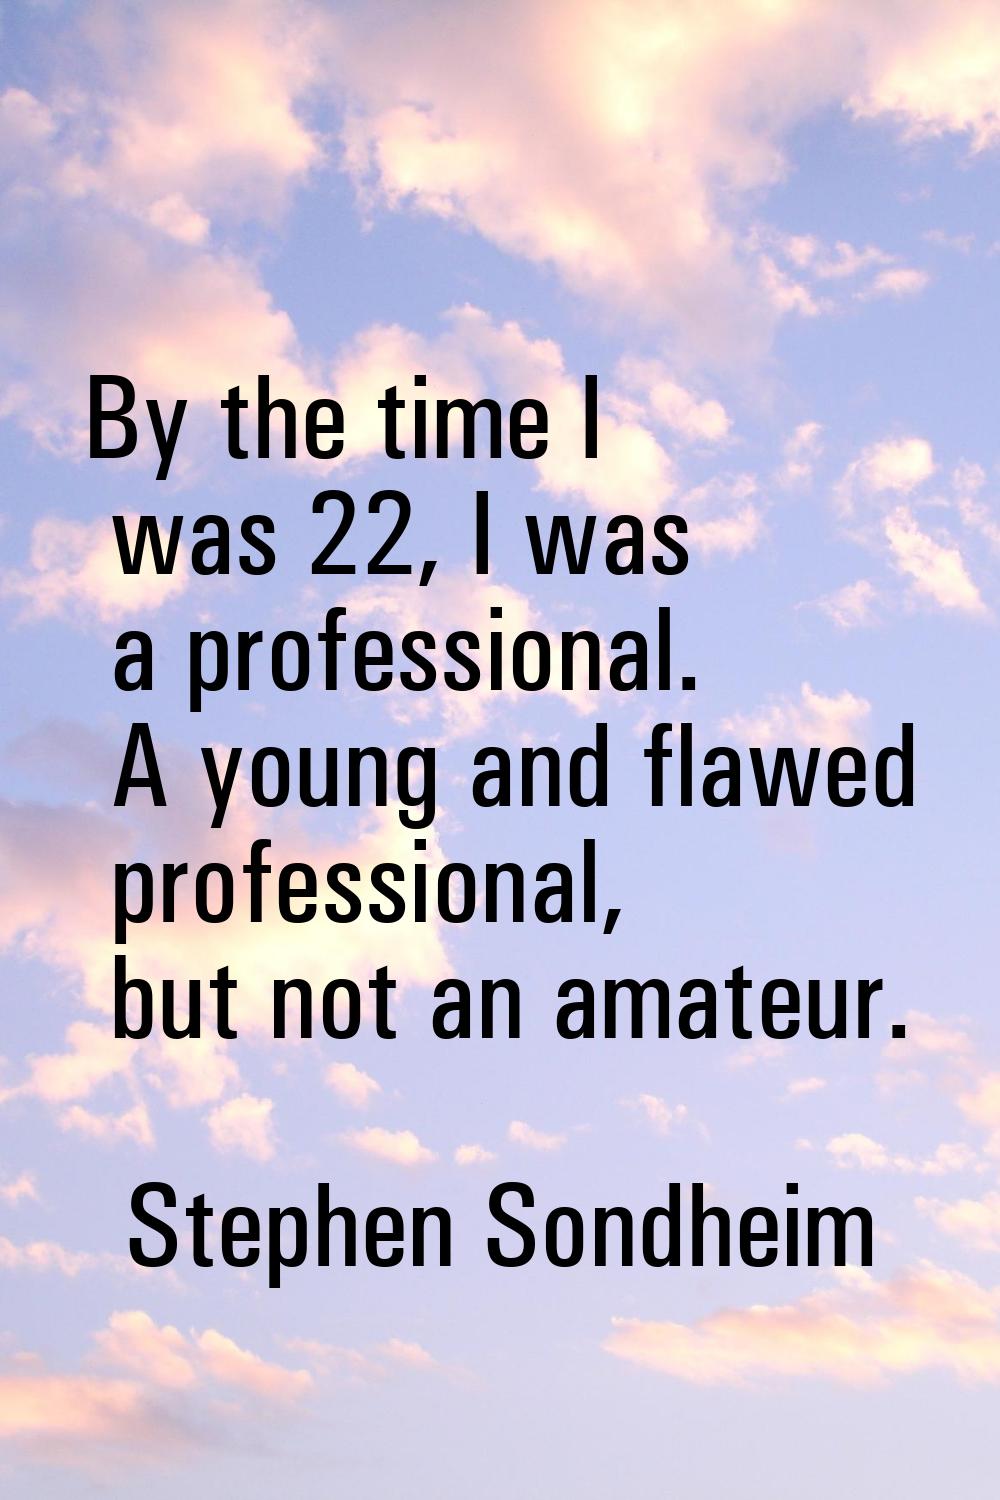 By the time I was 22, I was a professional. A young and flawed professional, but not an amateur.